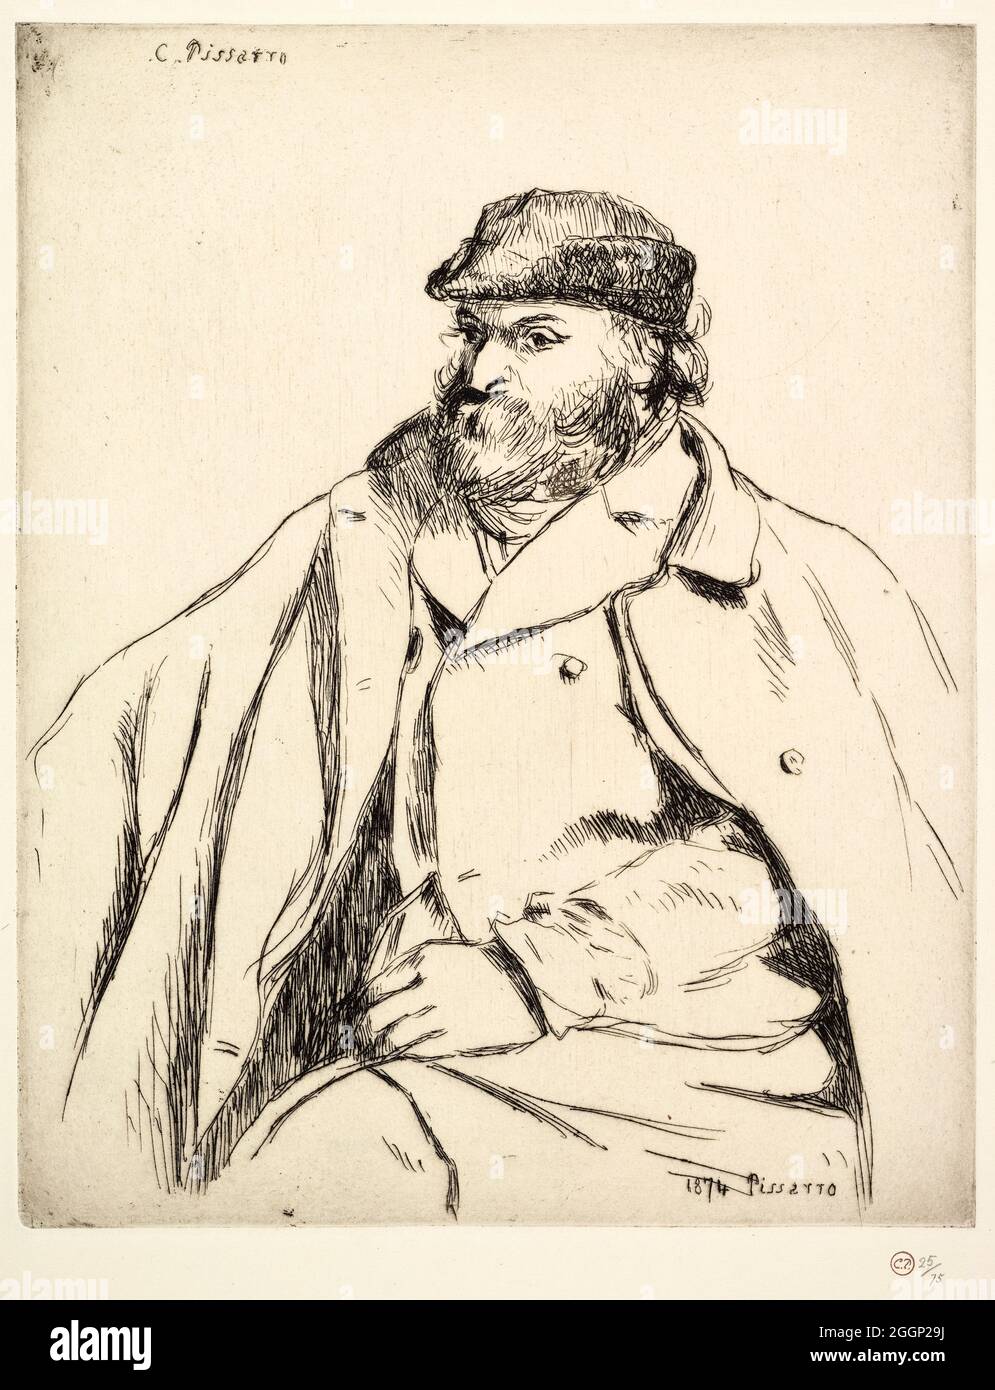 Portrait of Paul Cézanne (1839-1906), drypoint by Camille Pissarro, 1874 Stock Photo